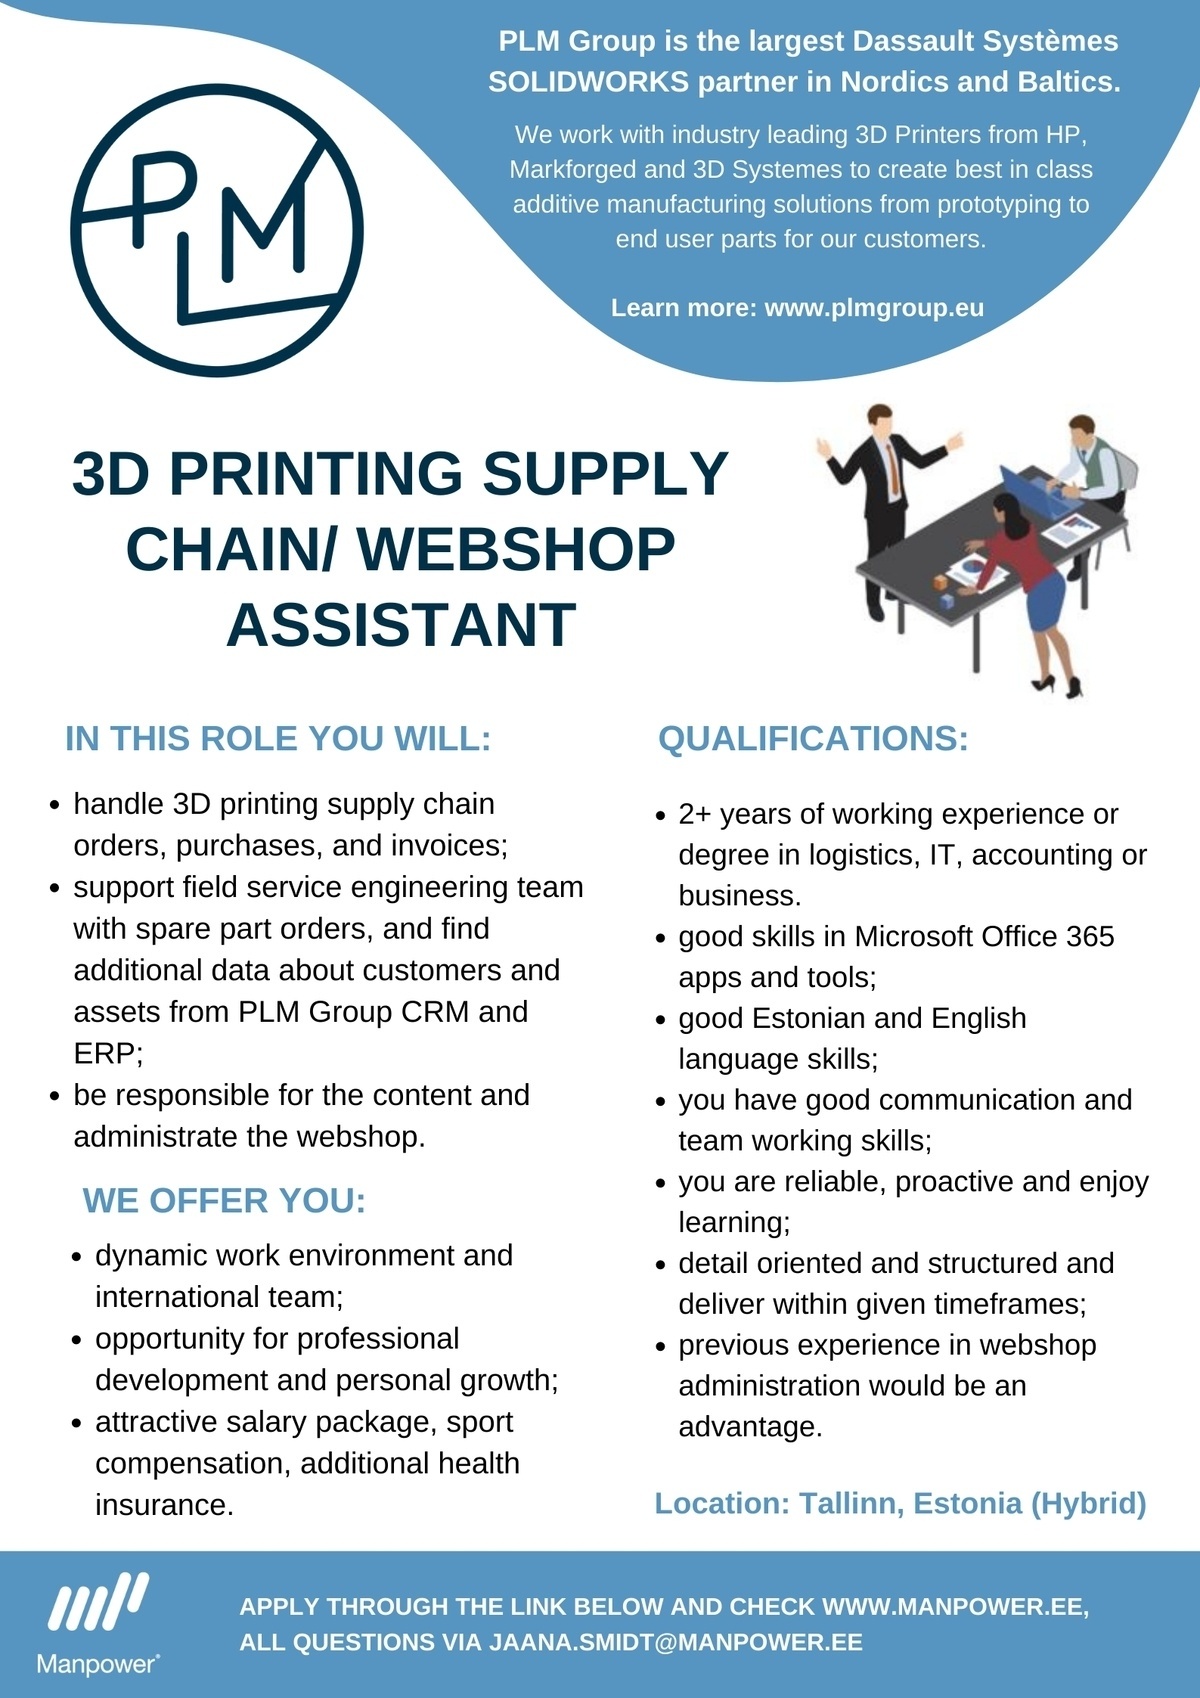 Manpower OÜ 3D PRINTING SUPPLY CHAIN/WEBSHOP ASSISTANT